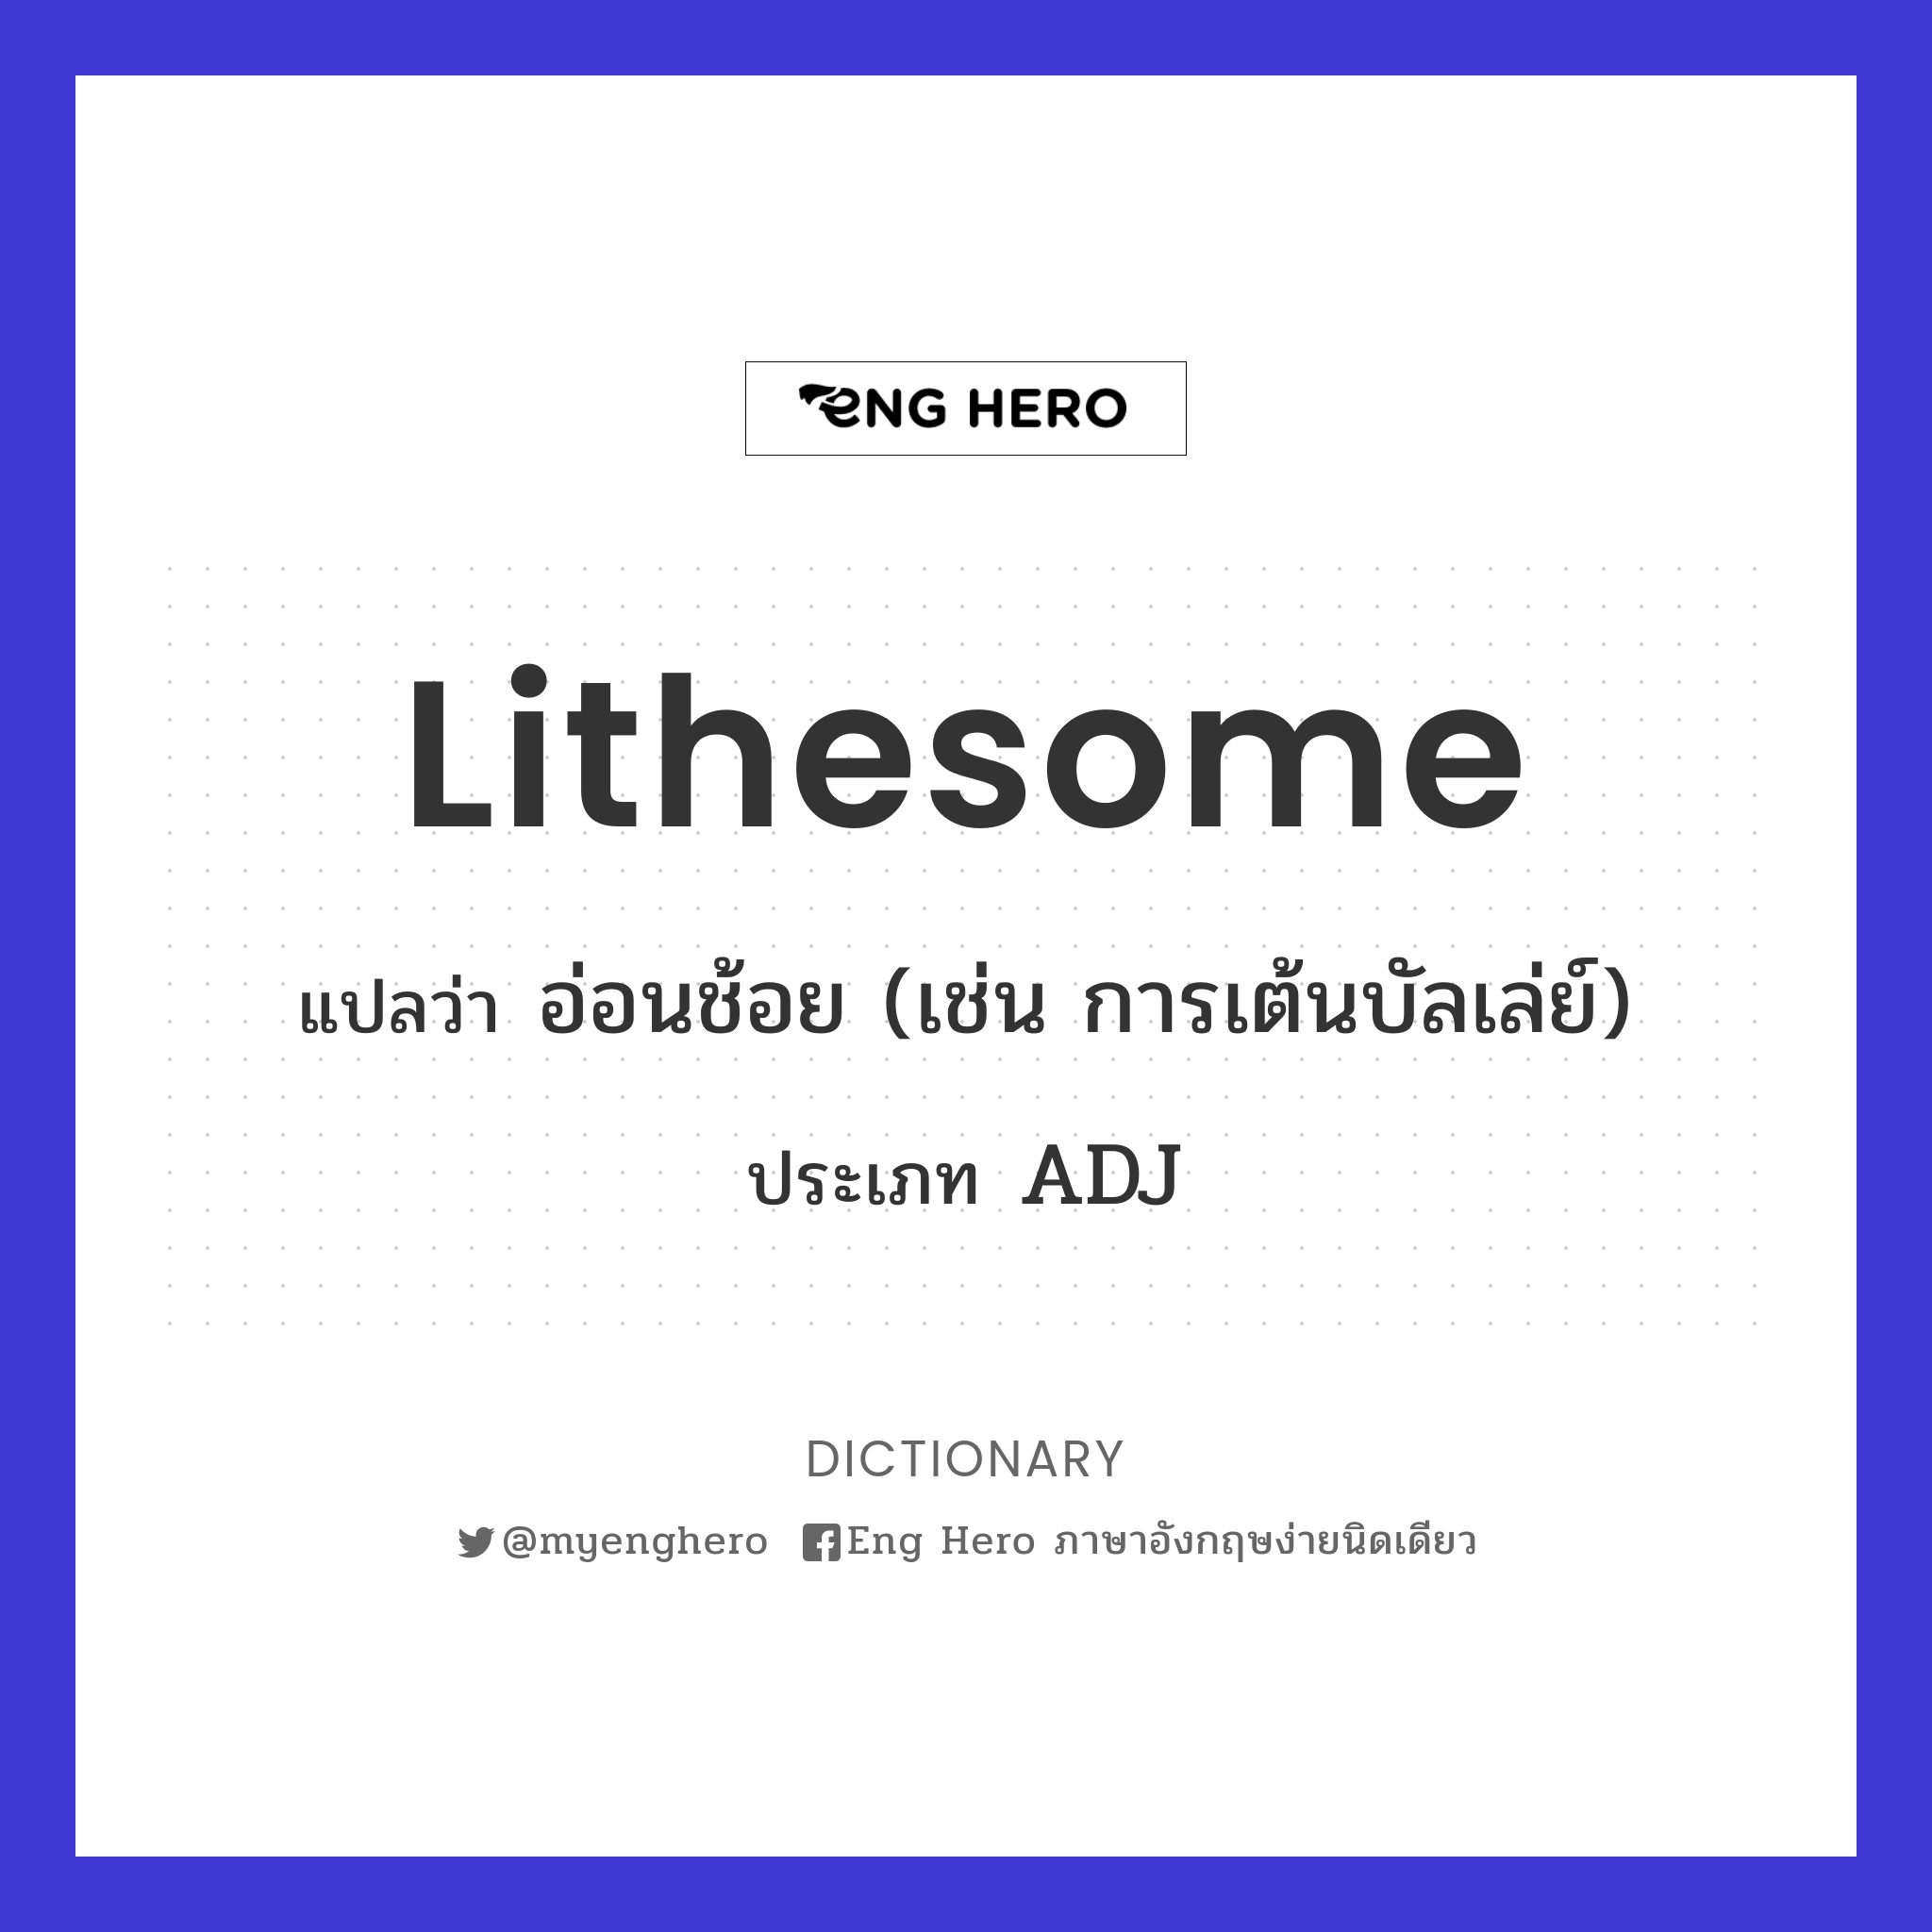 lithesome